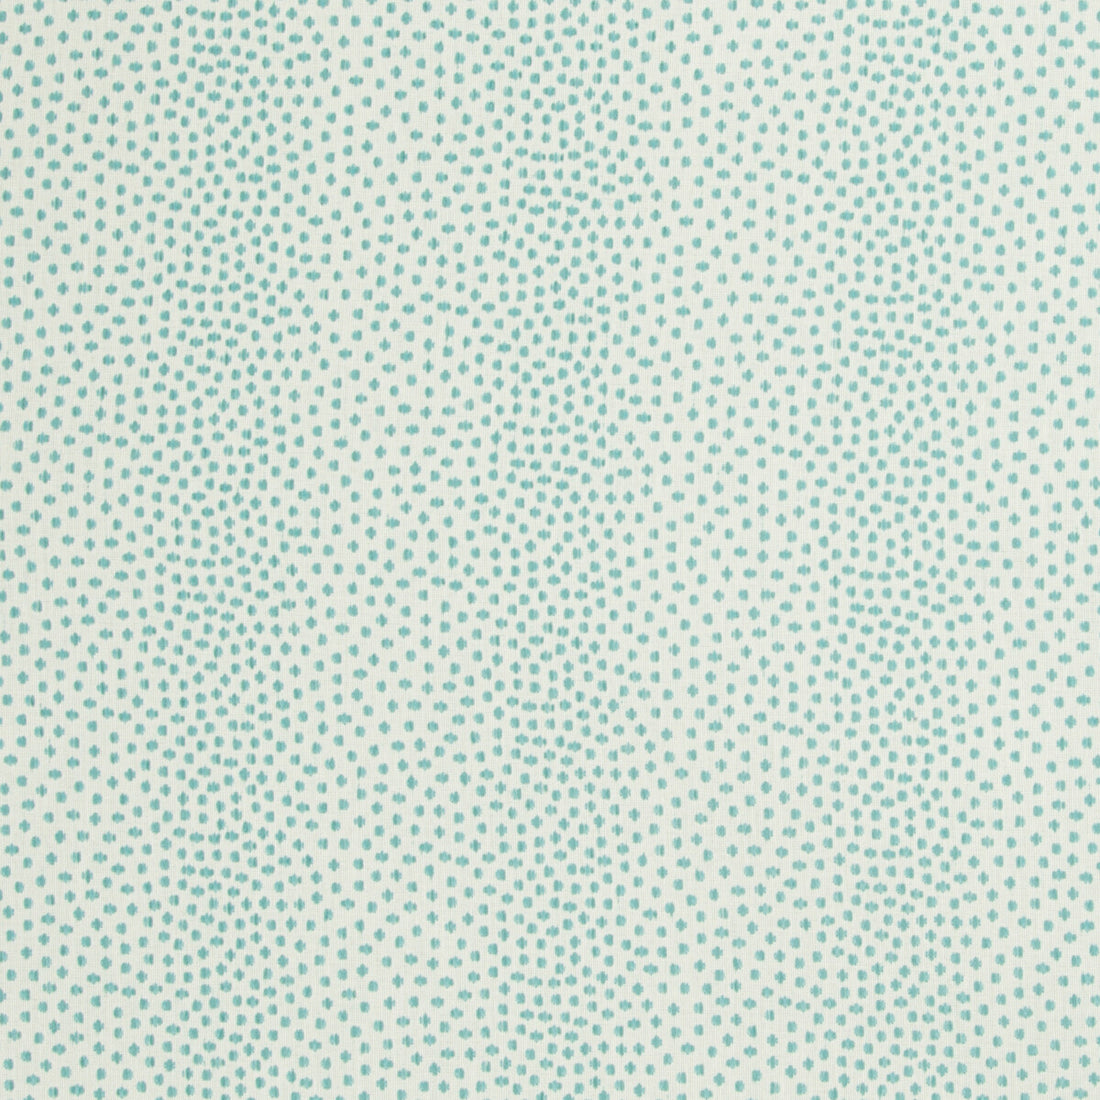 Kravet Design fabric in 34710-35 color - pattern 34710.35.0 - by Kravet Design in the Crypton Home collection